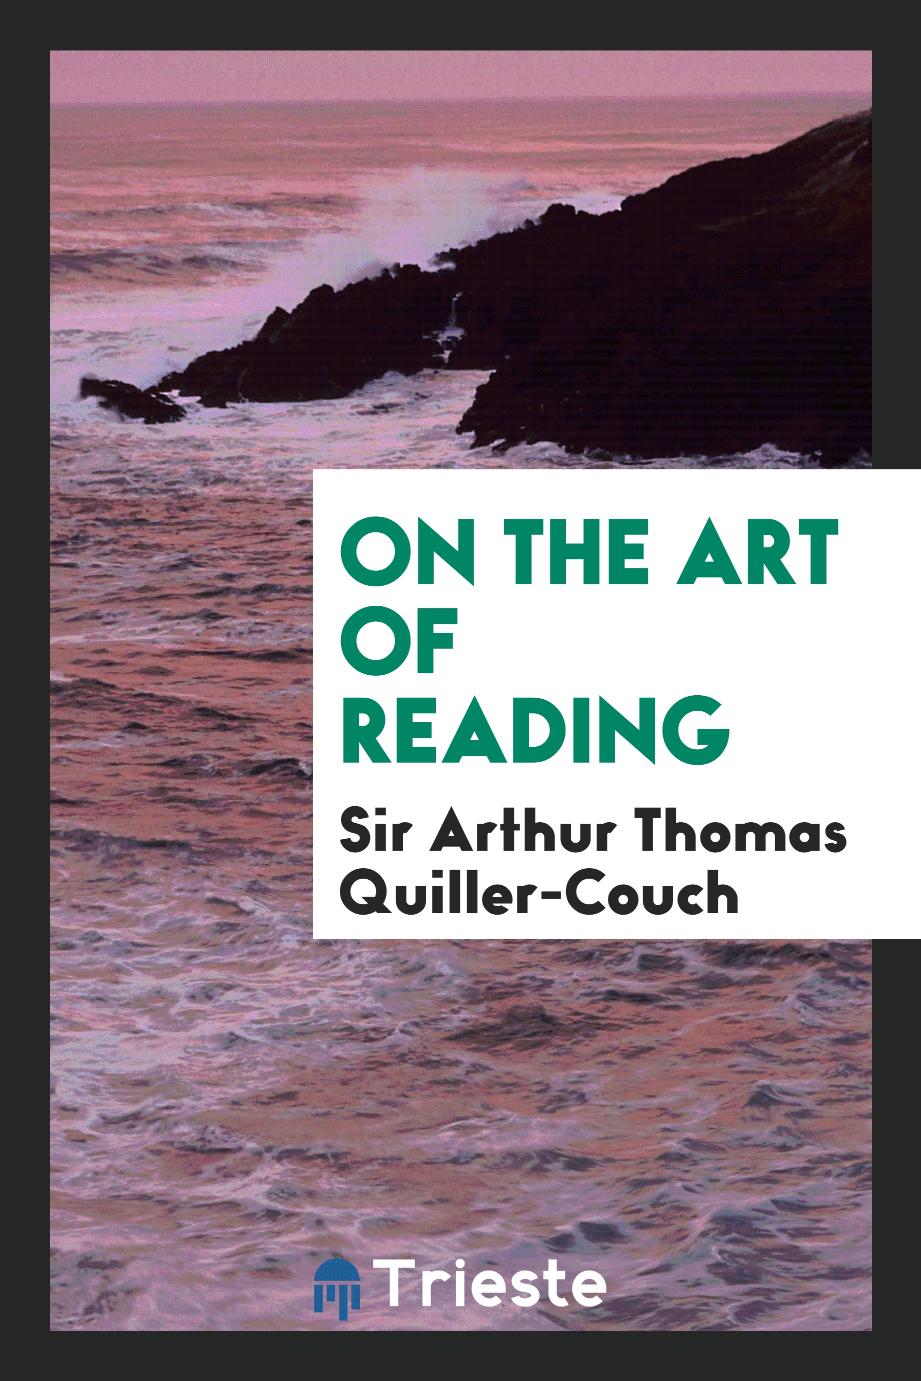 Sir Arthur Thomas Quiller-Couch - On the art of reading